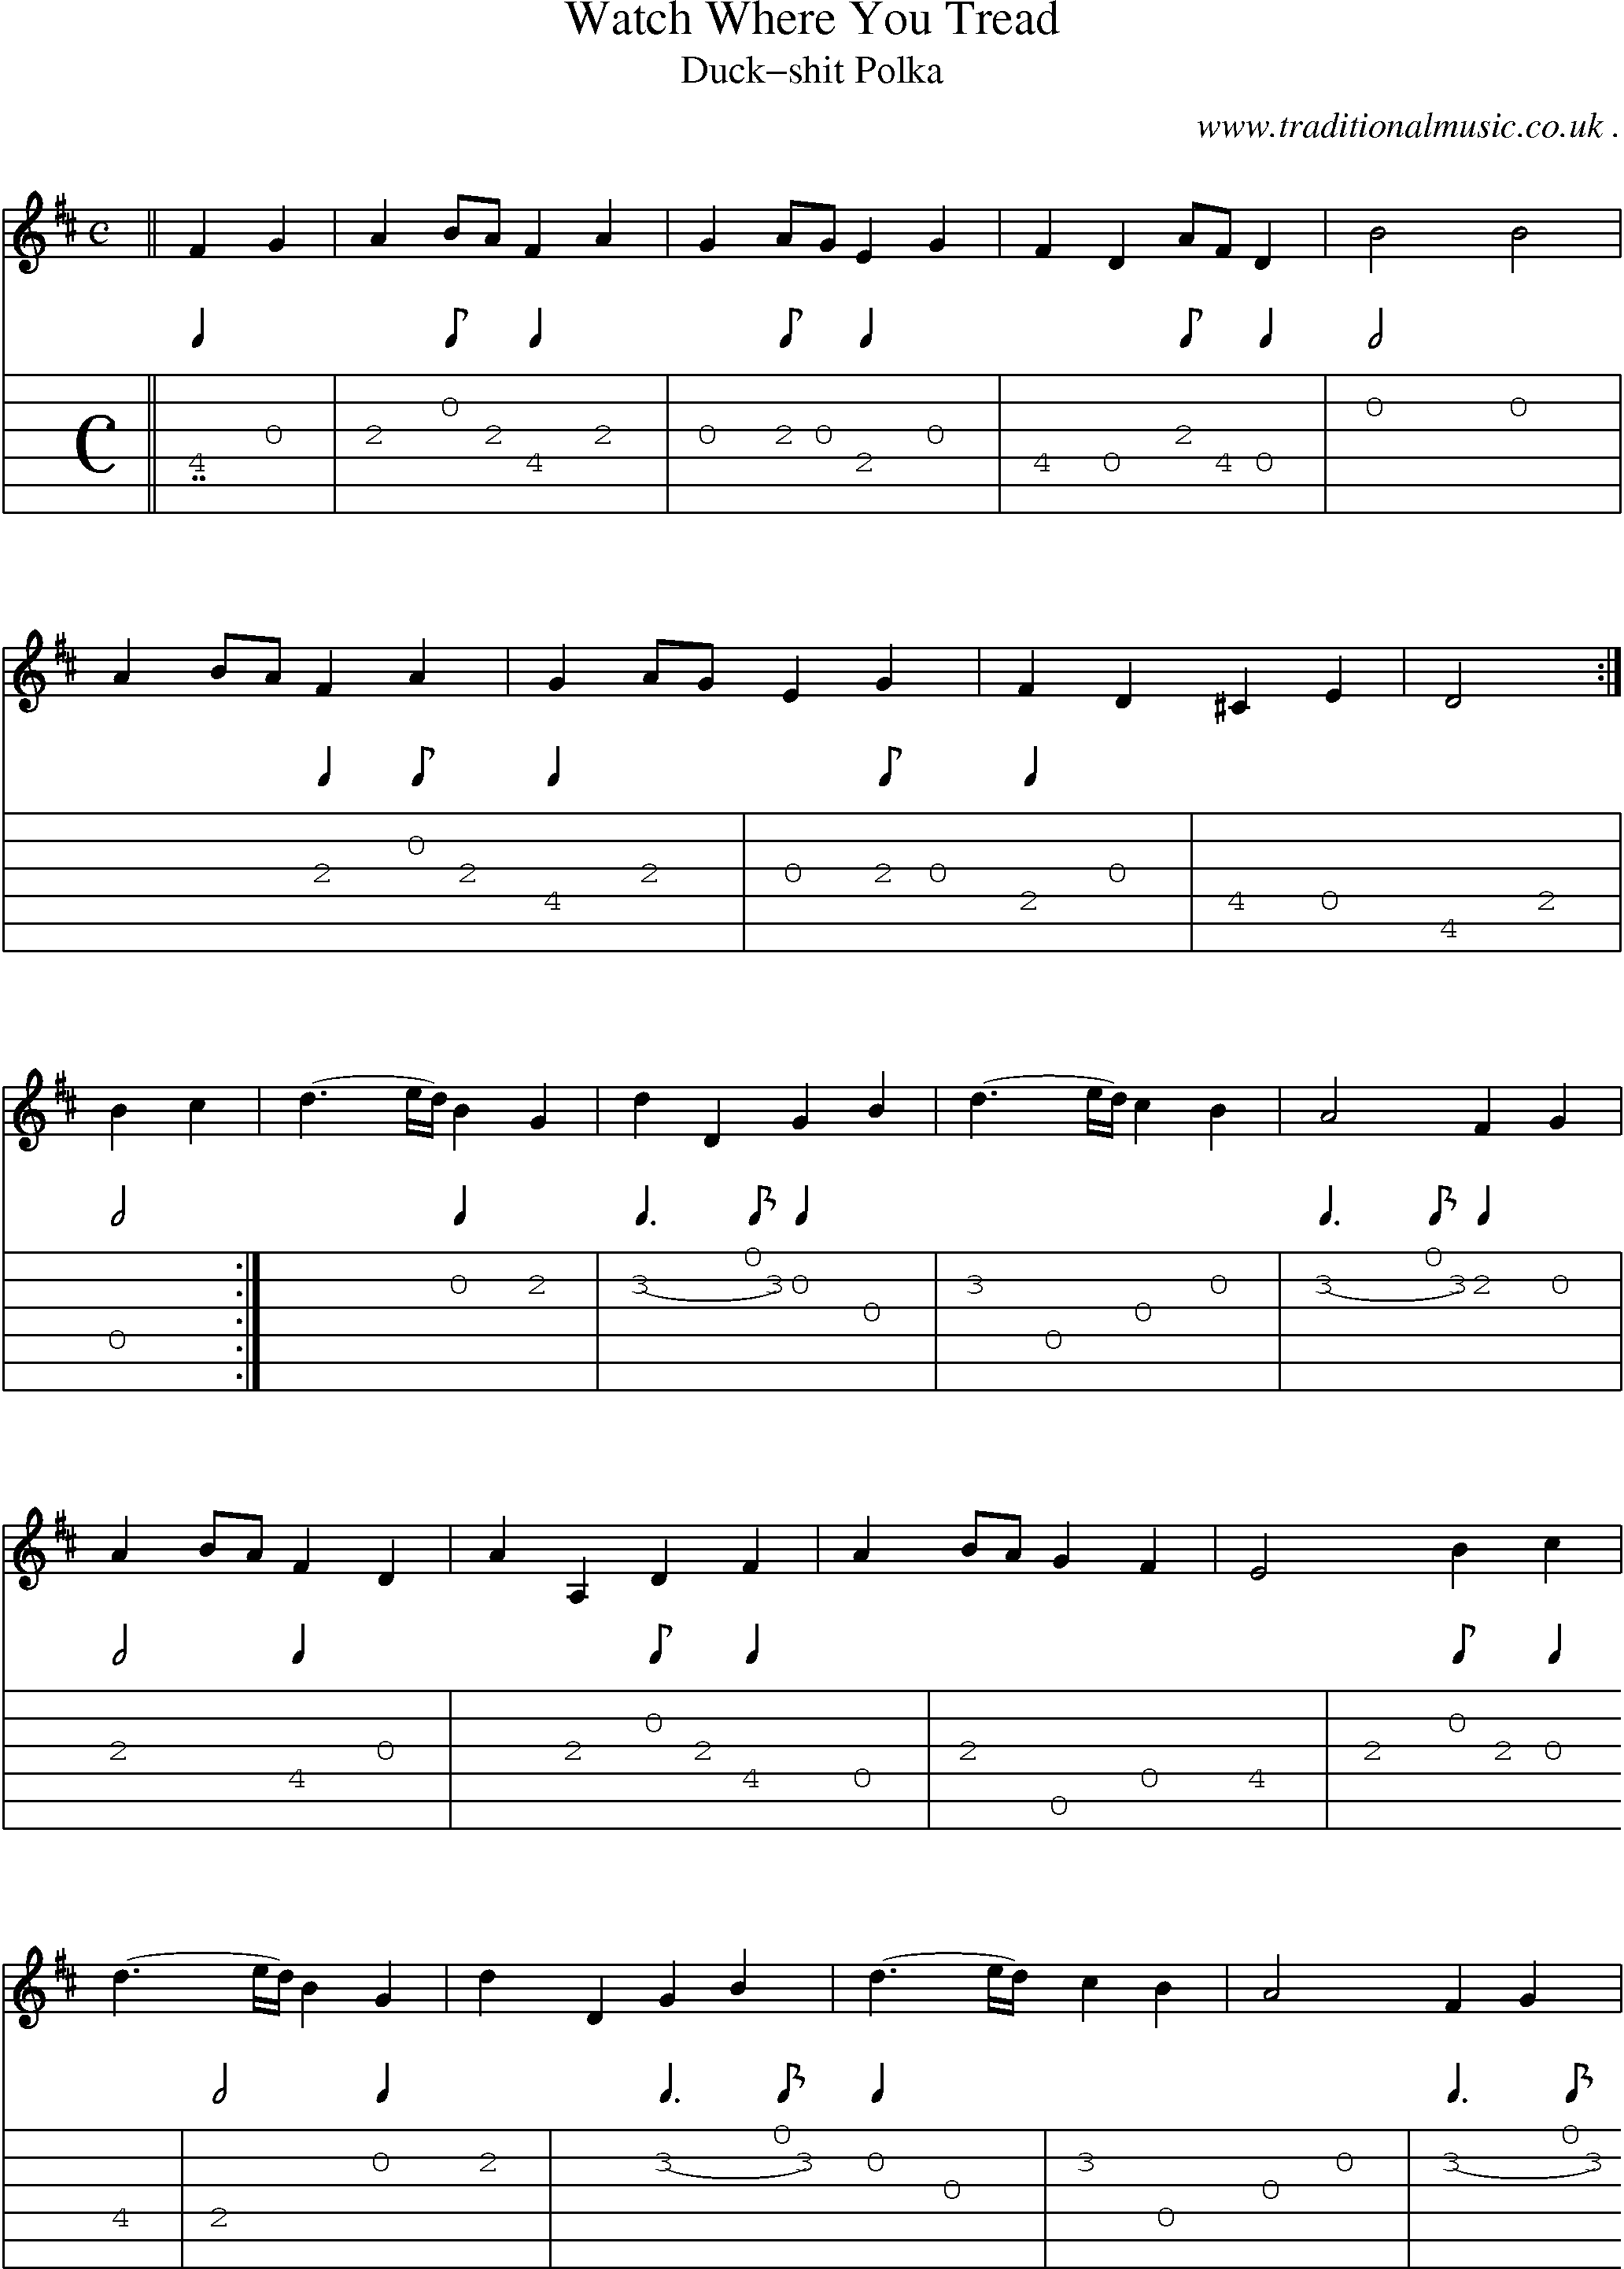 Sheet-music  score, Chords and Guitar Tabs for Watch Where You Tread